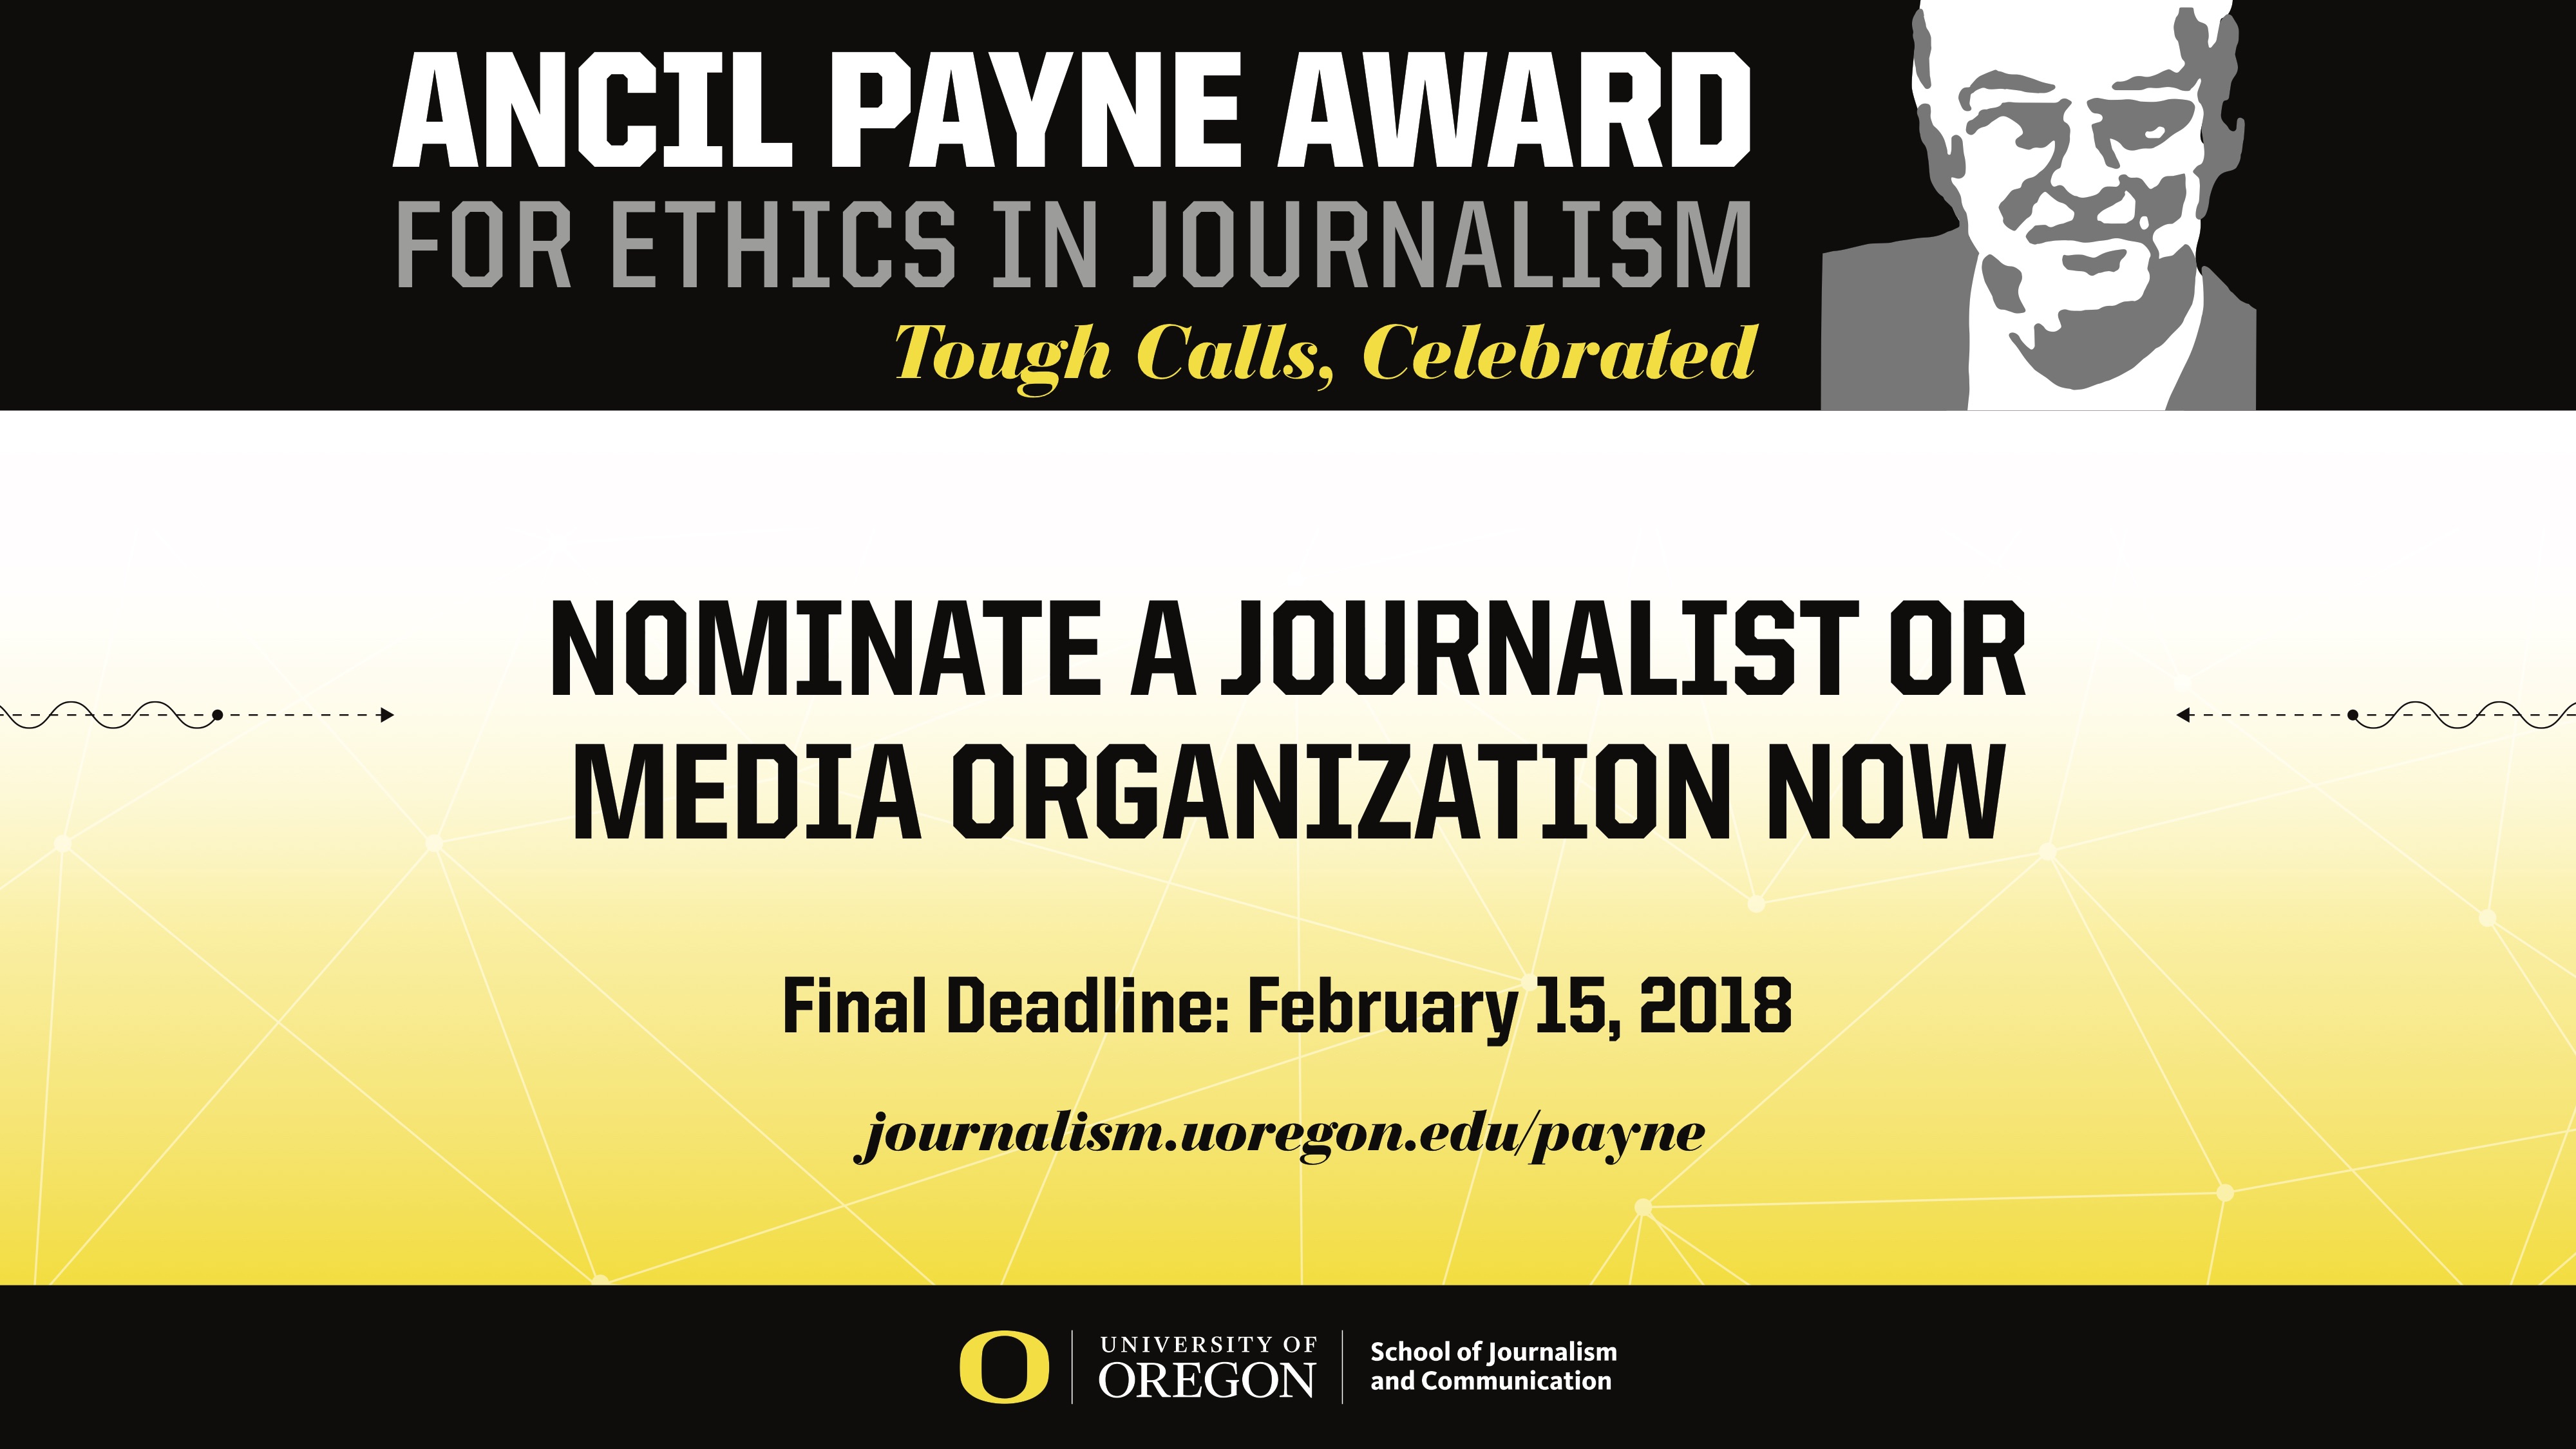 Ancil Payne Award for Ethics in Journalism 2018 – $10,000 prize for U.S.-based Journalists